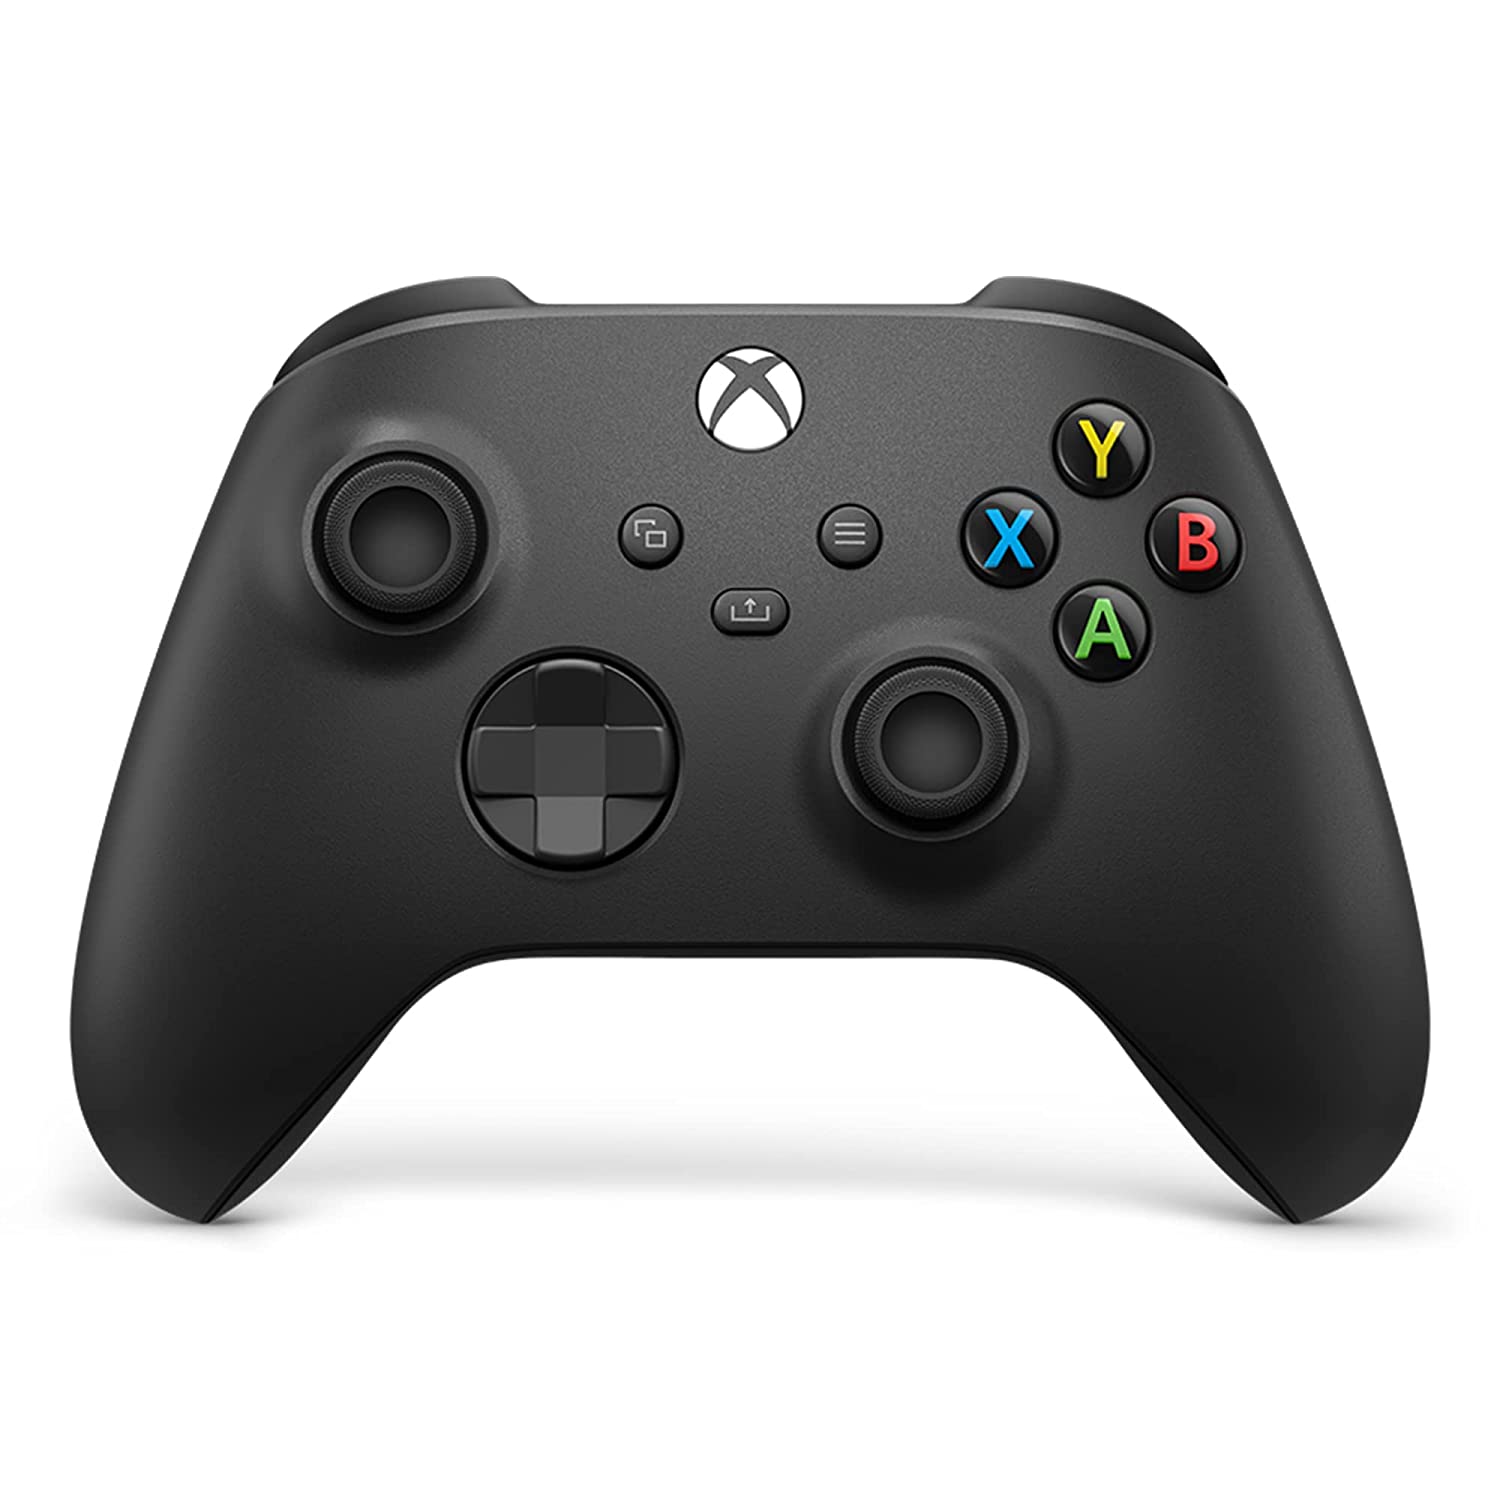 Microsoft Xbox Series X/S/One Wireless Controller (Latest Model) - Carbon Black (Certified Refurbished)